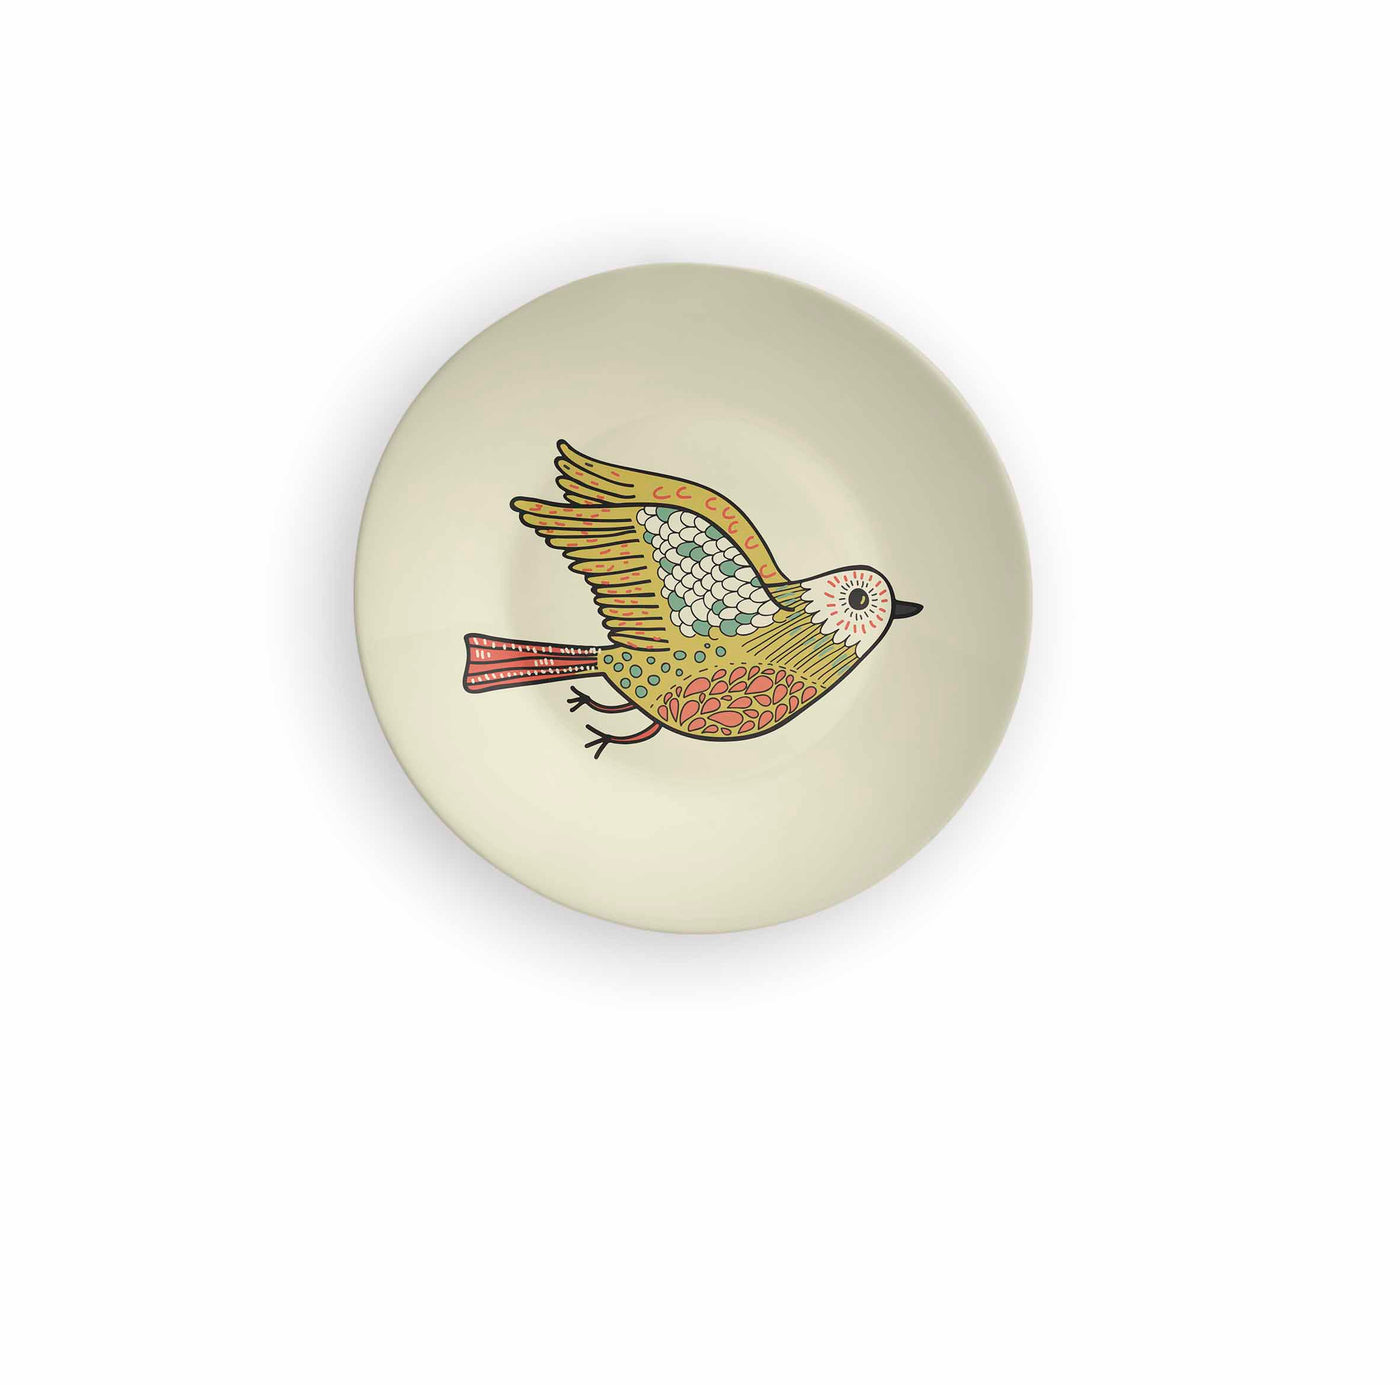 Vintage American Sparrow Decorative Wall Plate - Wall Decor - 2